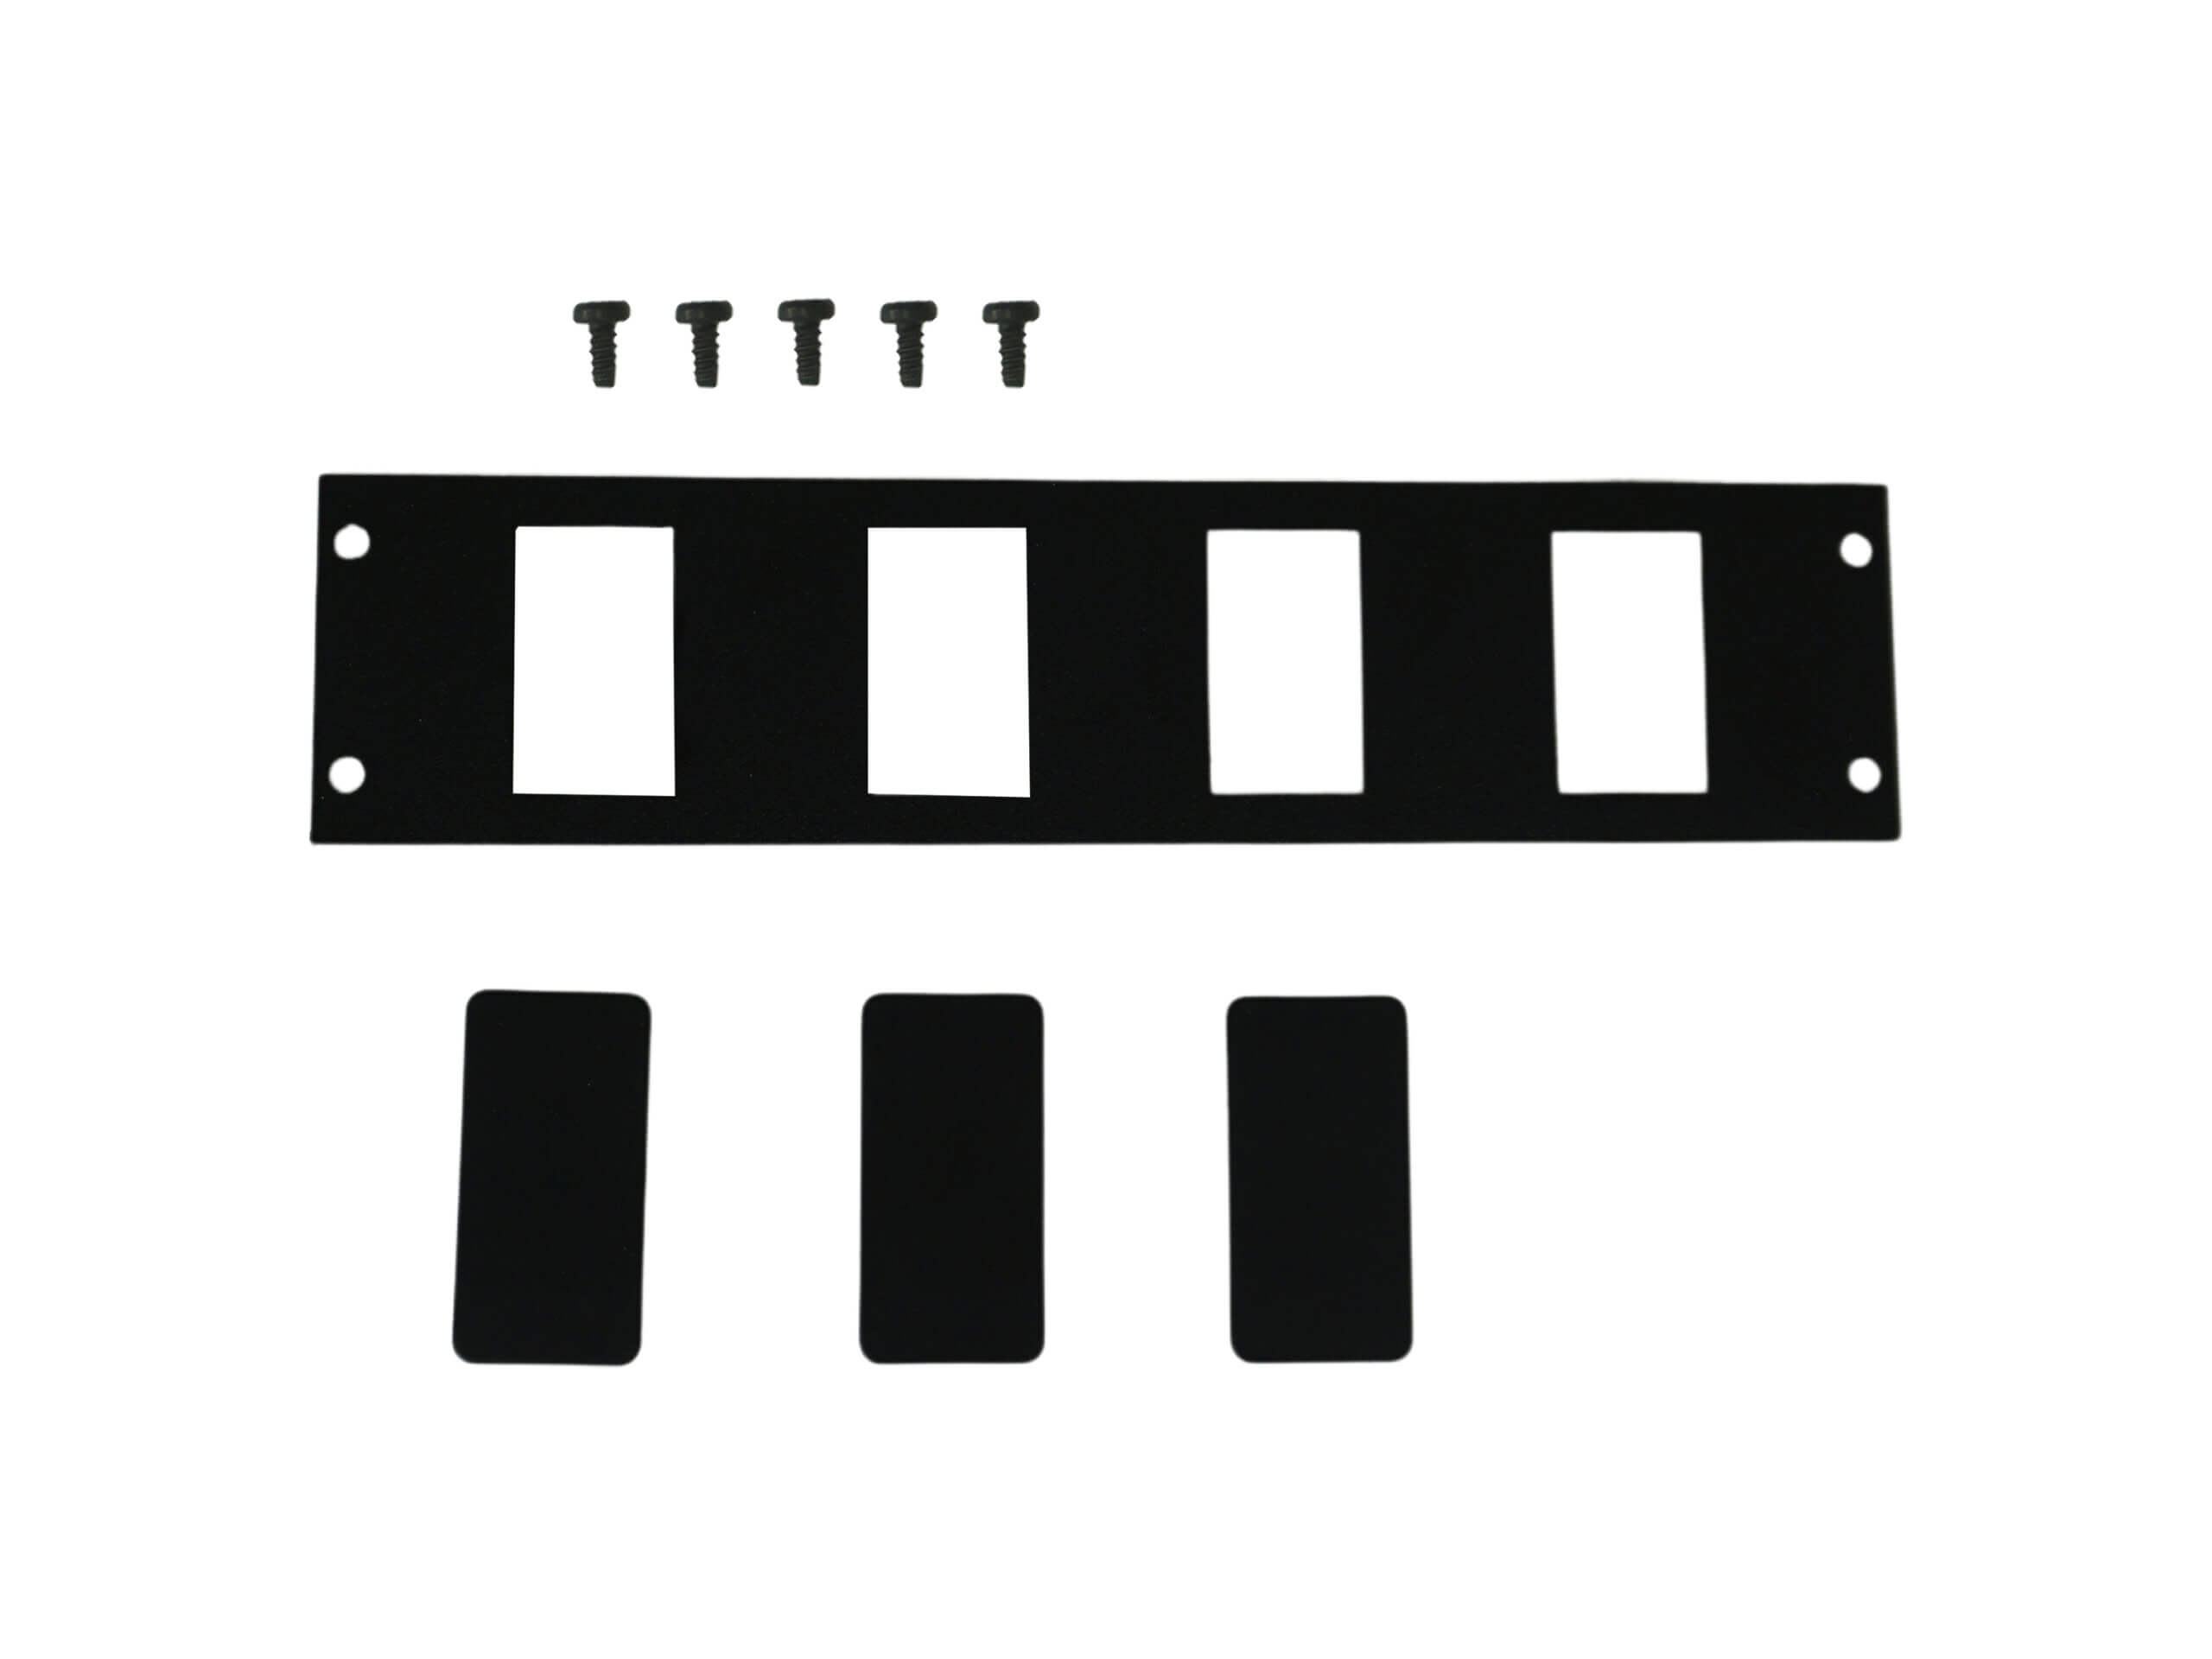 Console Accessory Bracket Kit with 3 Blanks for Rectangular Accessories